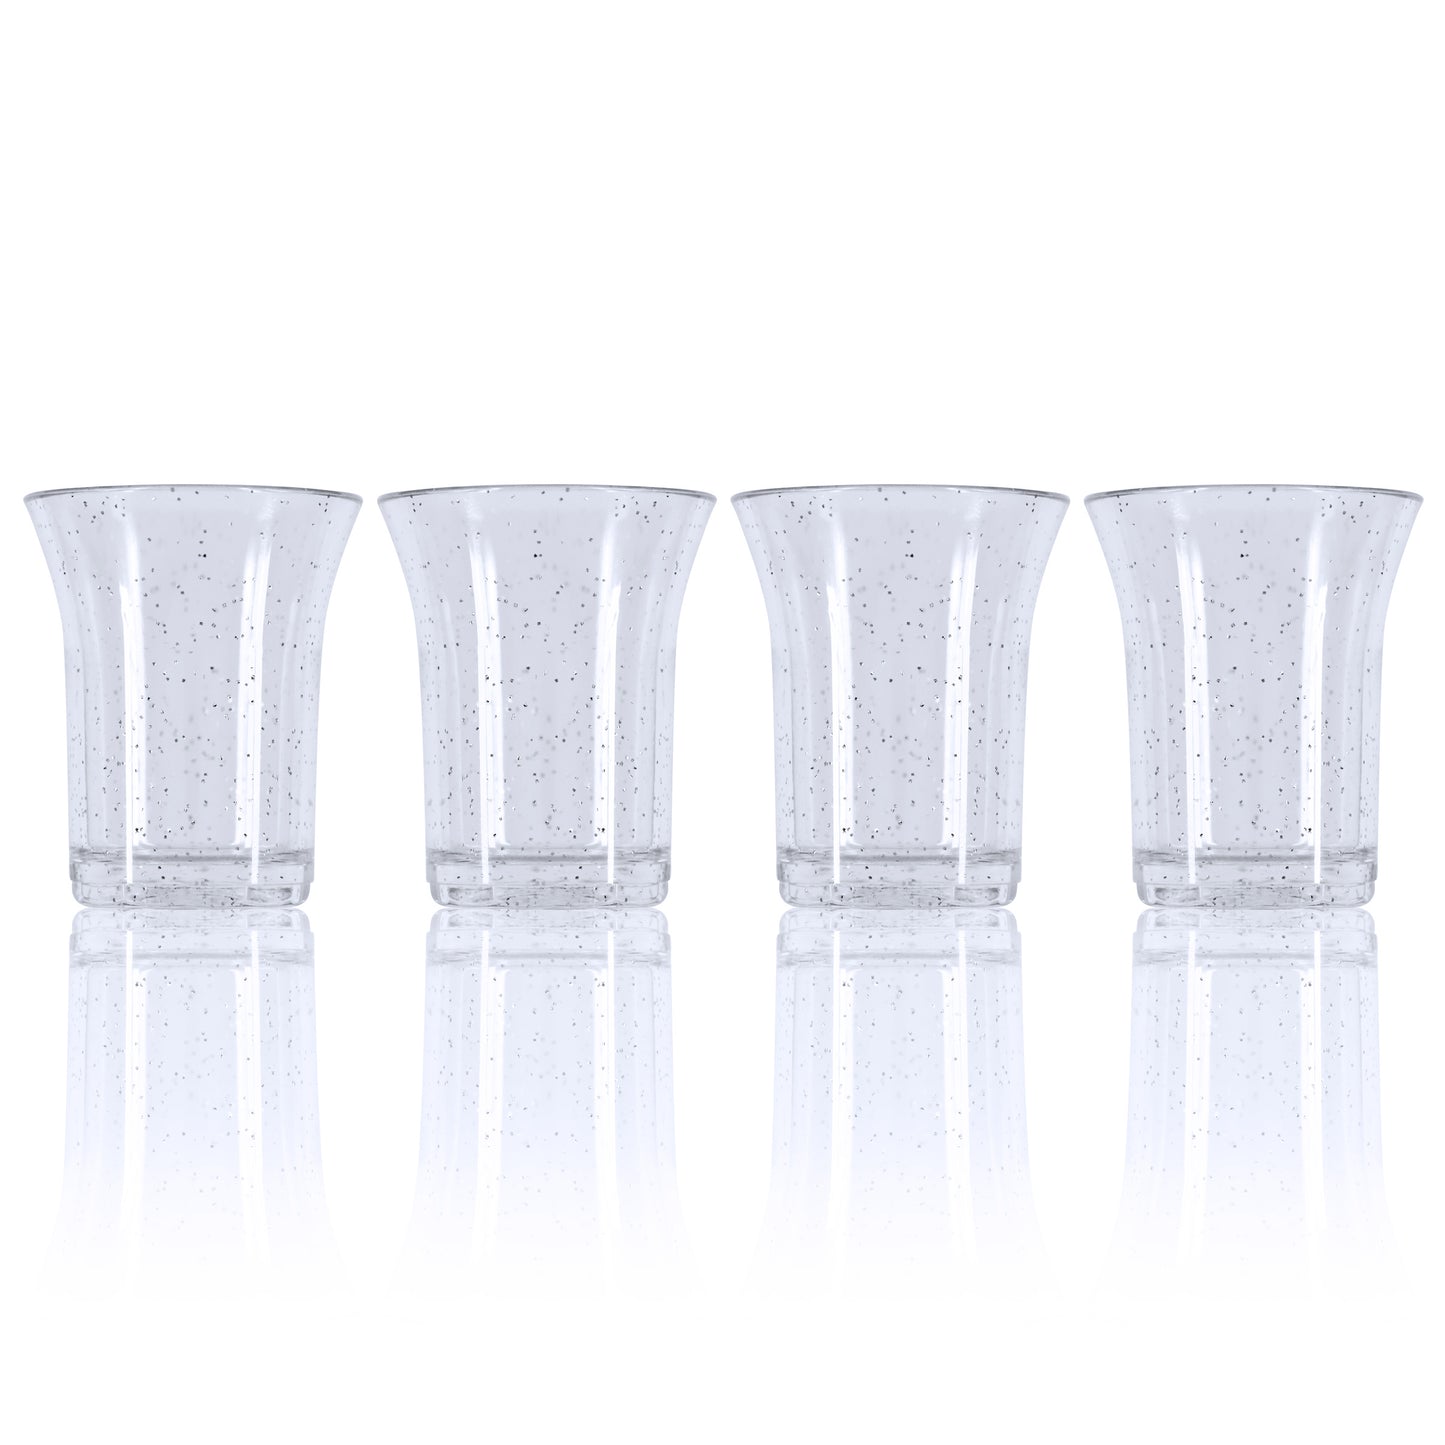 20 x Silver Glitter Shot Glasses - Heavy Duty Strong Reusable Plastic 25ml 30ml Stackable. Dishwasher Safe Christmas, Anniversaries, Sparkly-5056020182894-PCUP-SHOT-SG-20-Product Pro-Anniversary, Christmas, Glitter Shot Glasses, Gold, Shot Glasses, Shots, Silver Glitter